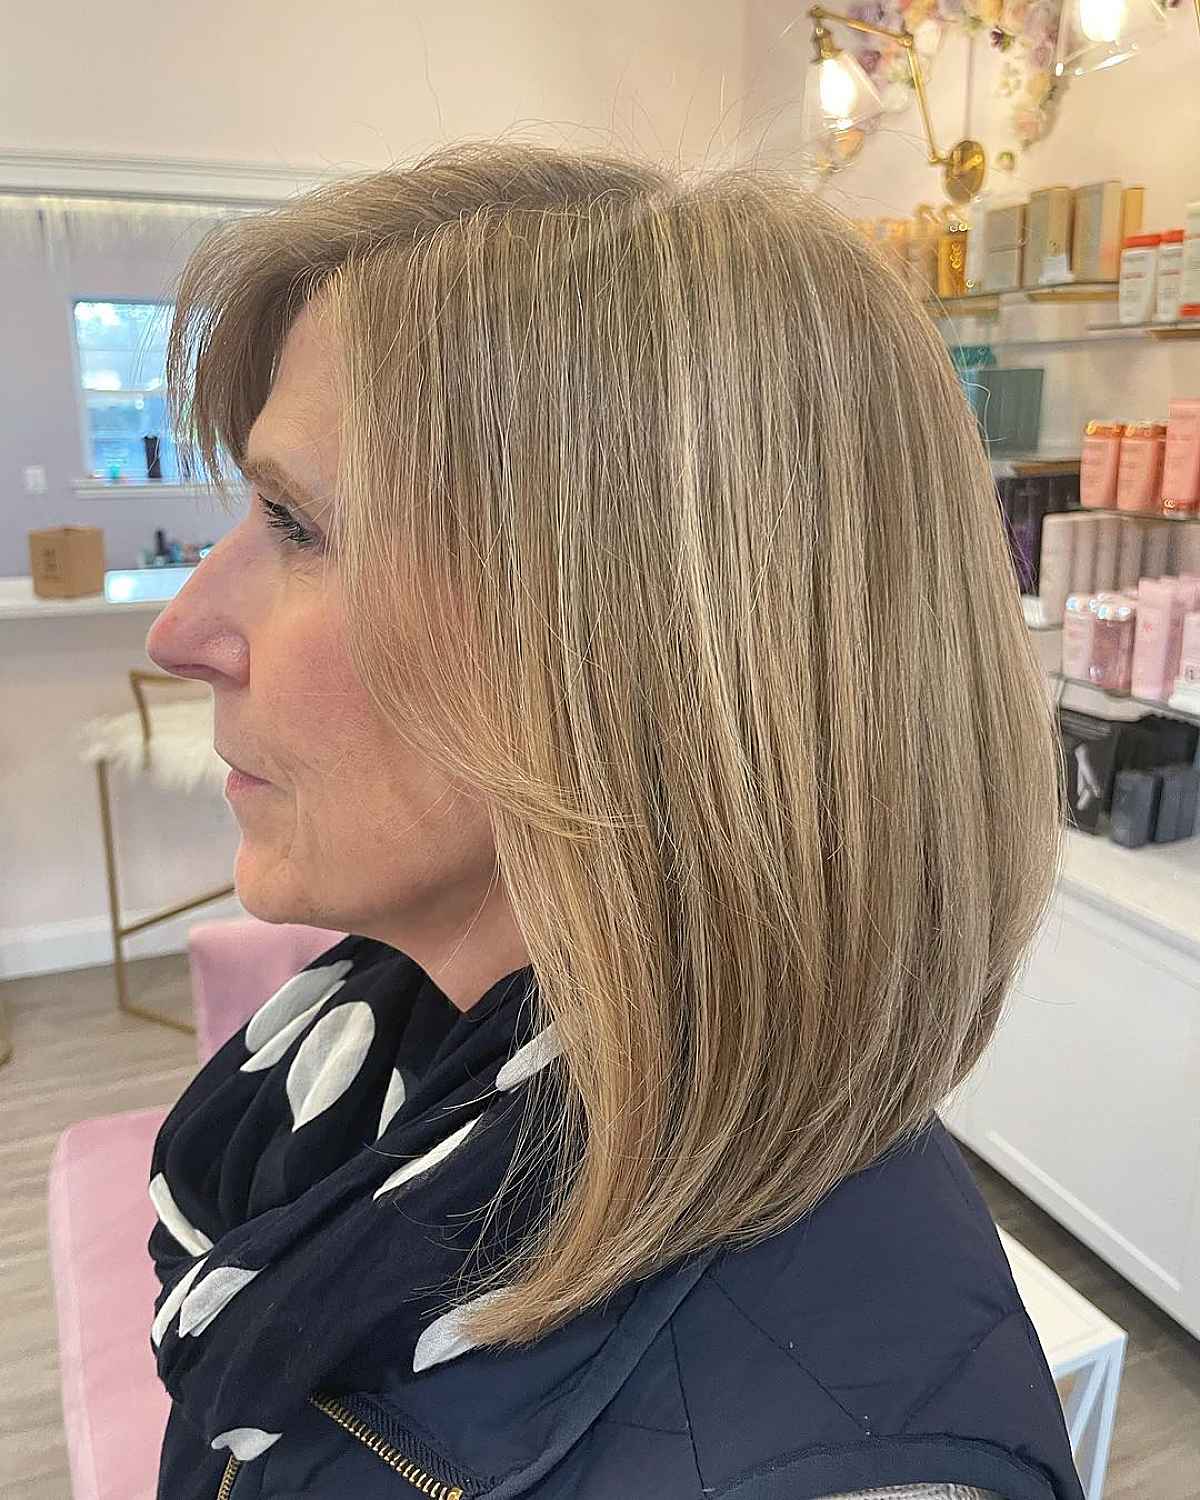 21 Stunning Long Bobs Women Over 60 Can Pull Off0